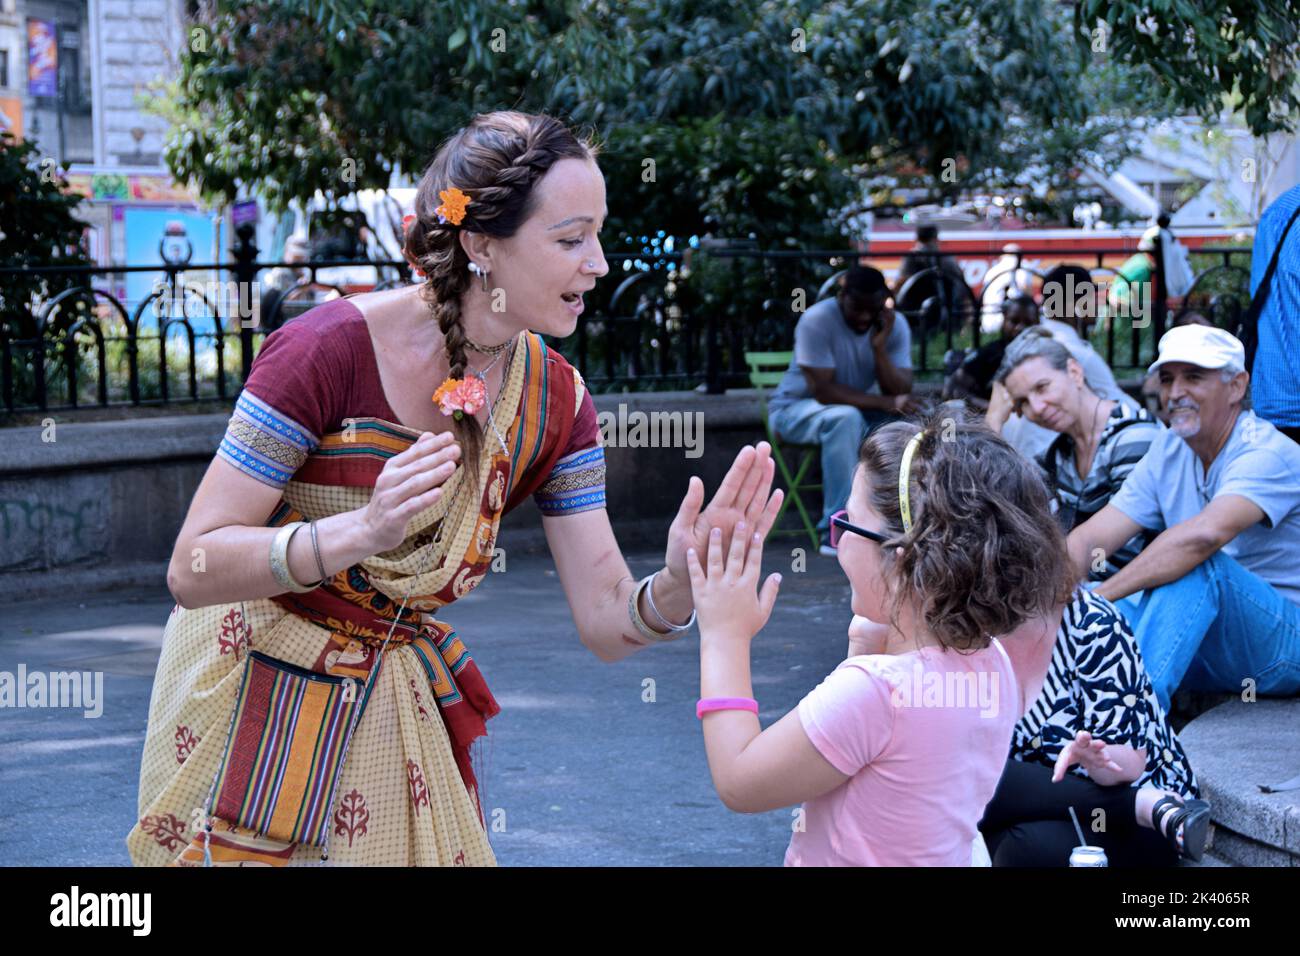 A Latvian Hare Krishna devotee plays patty cake with the daughter of a passer bye in Union Square Park, New York City Stock Photo